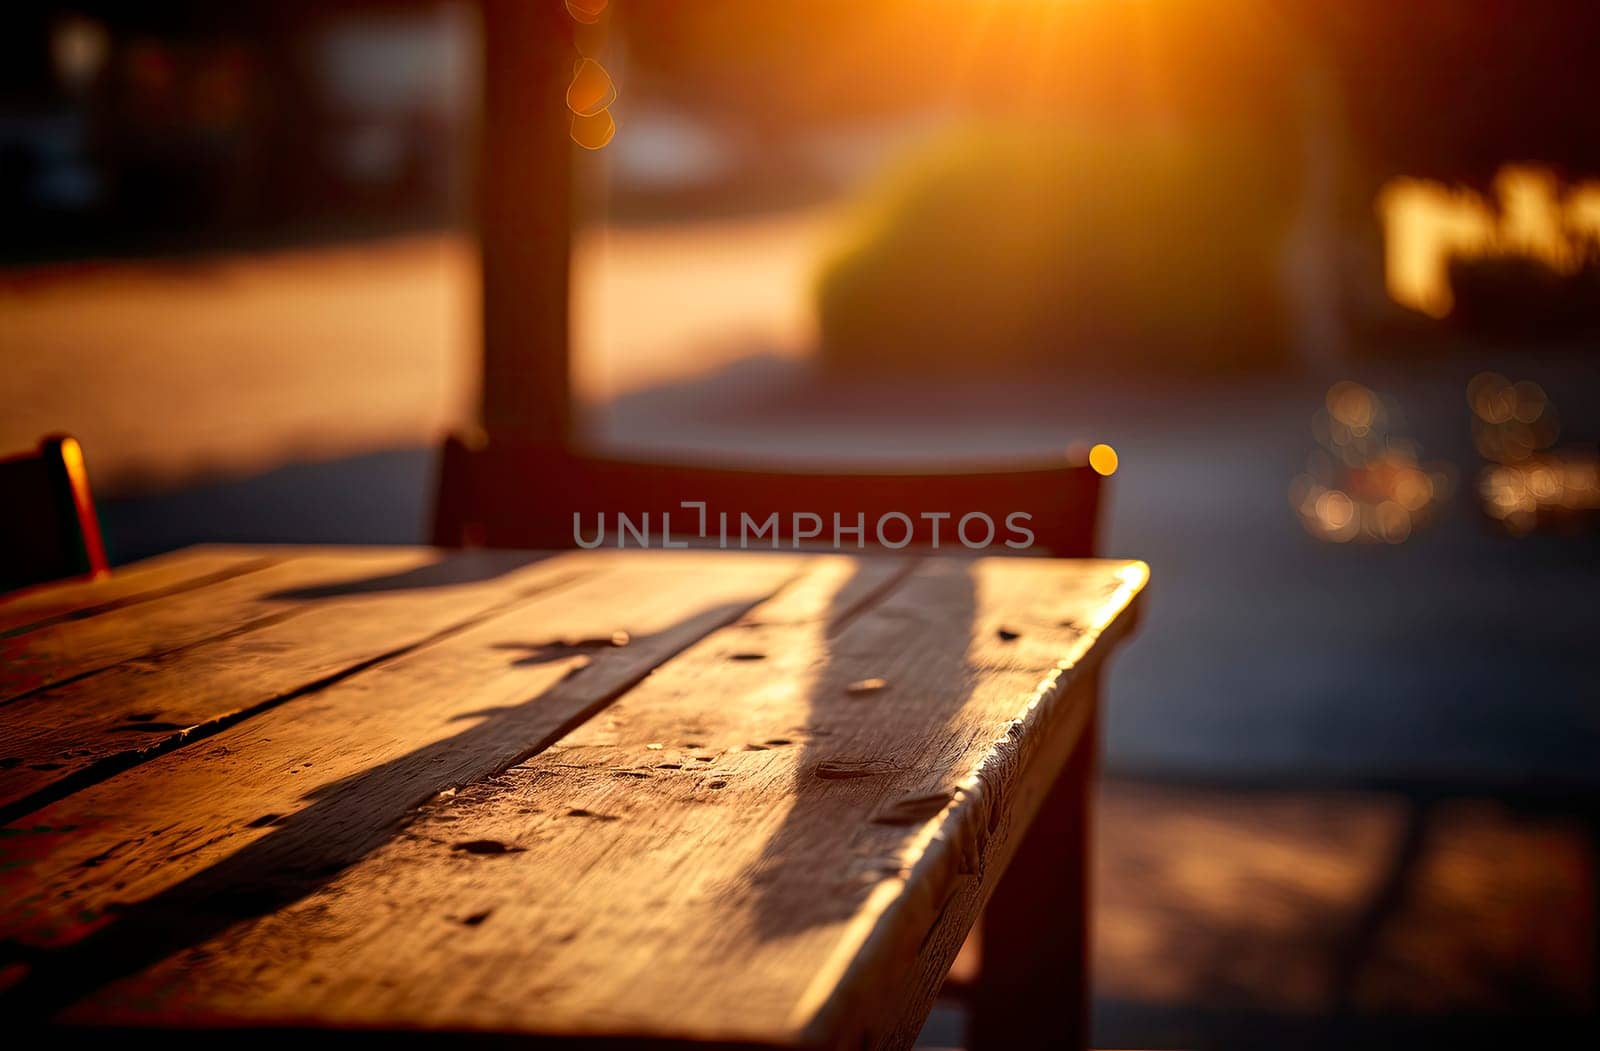 a wooden table in the foreground and a beam of light. by yanadjana